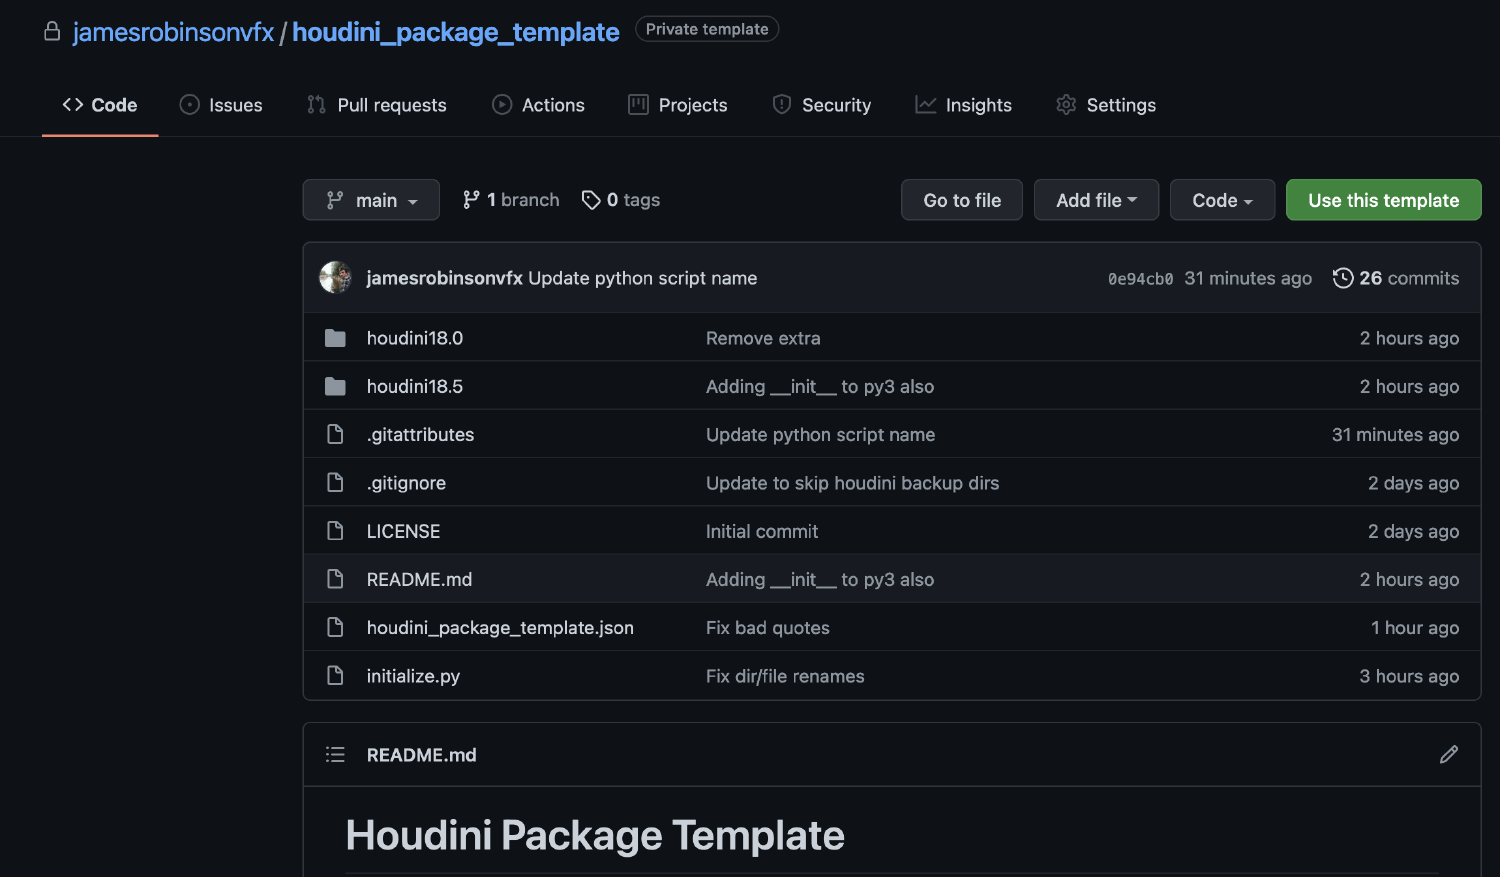 Houdini Package Template | James Robinson 🌊